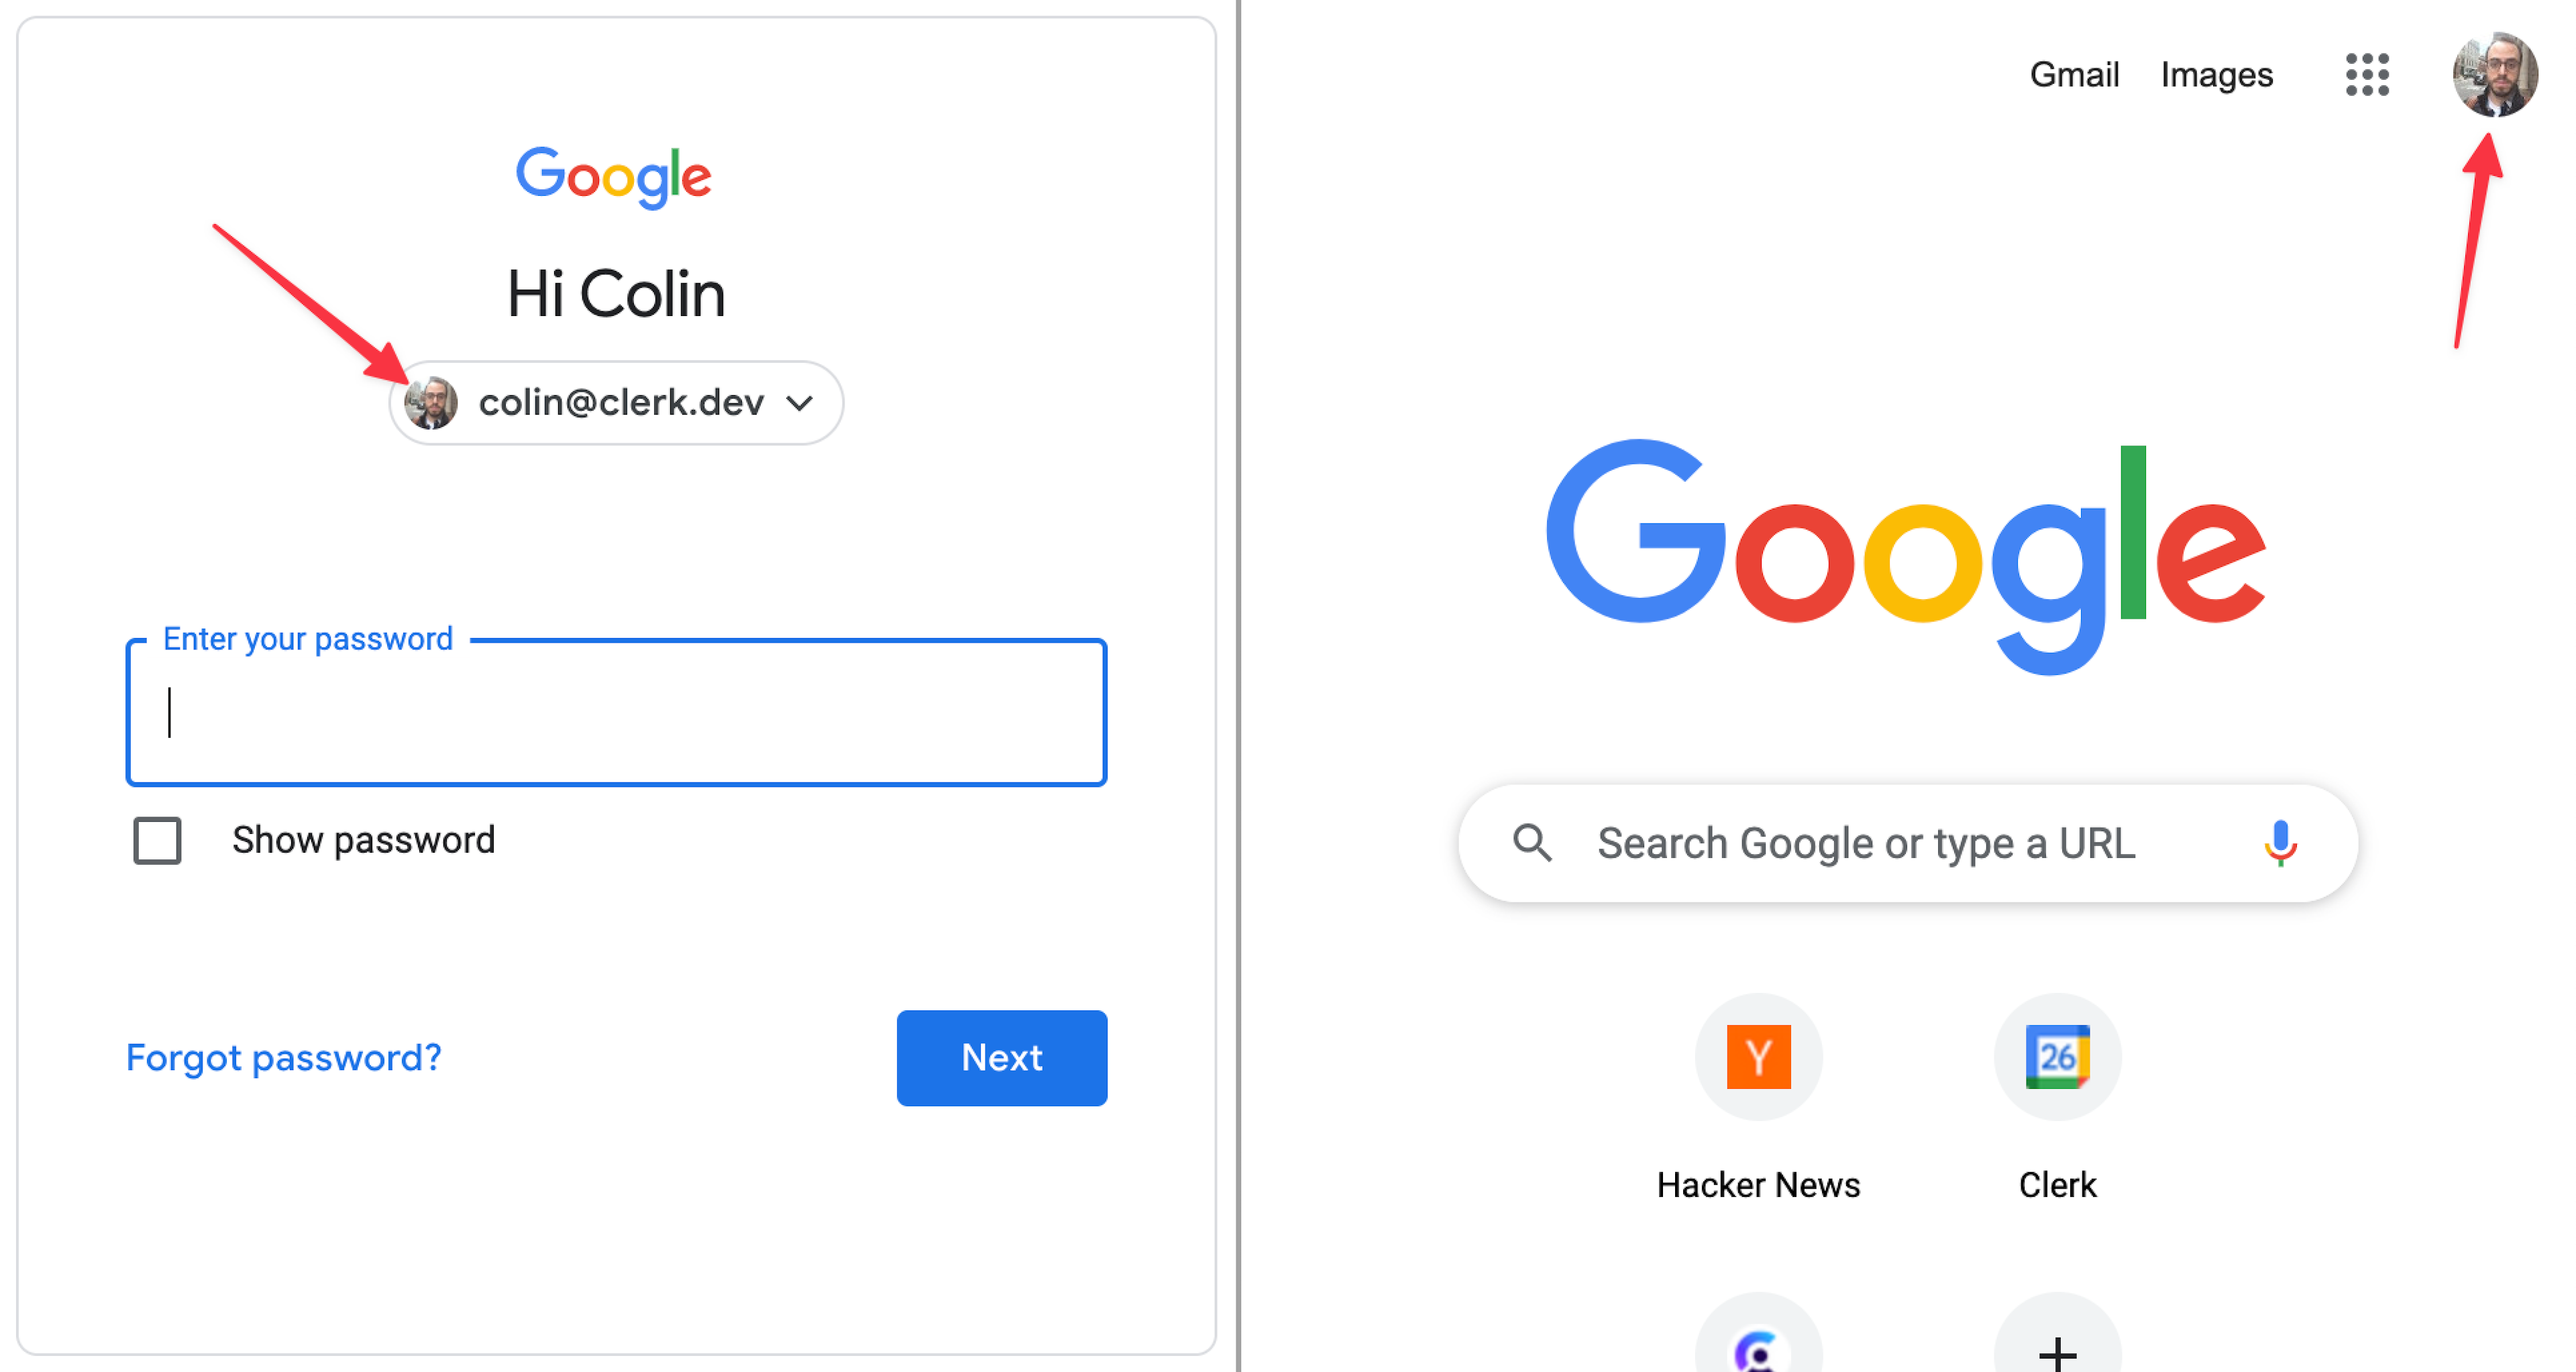 The Google sign-in flow